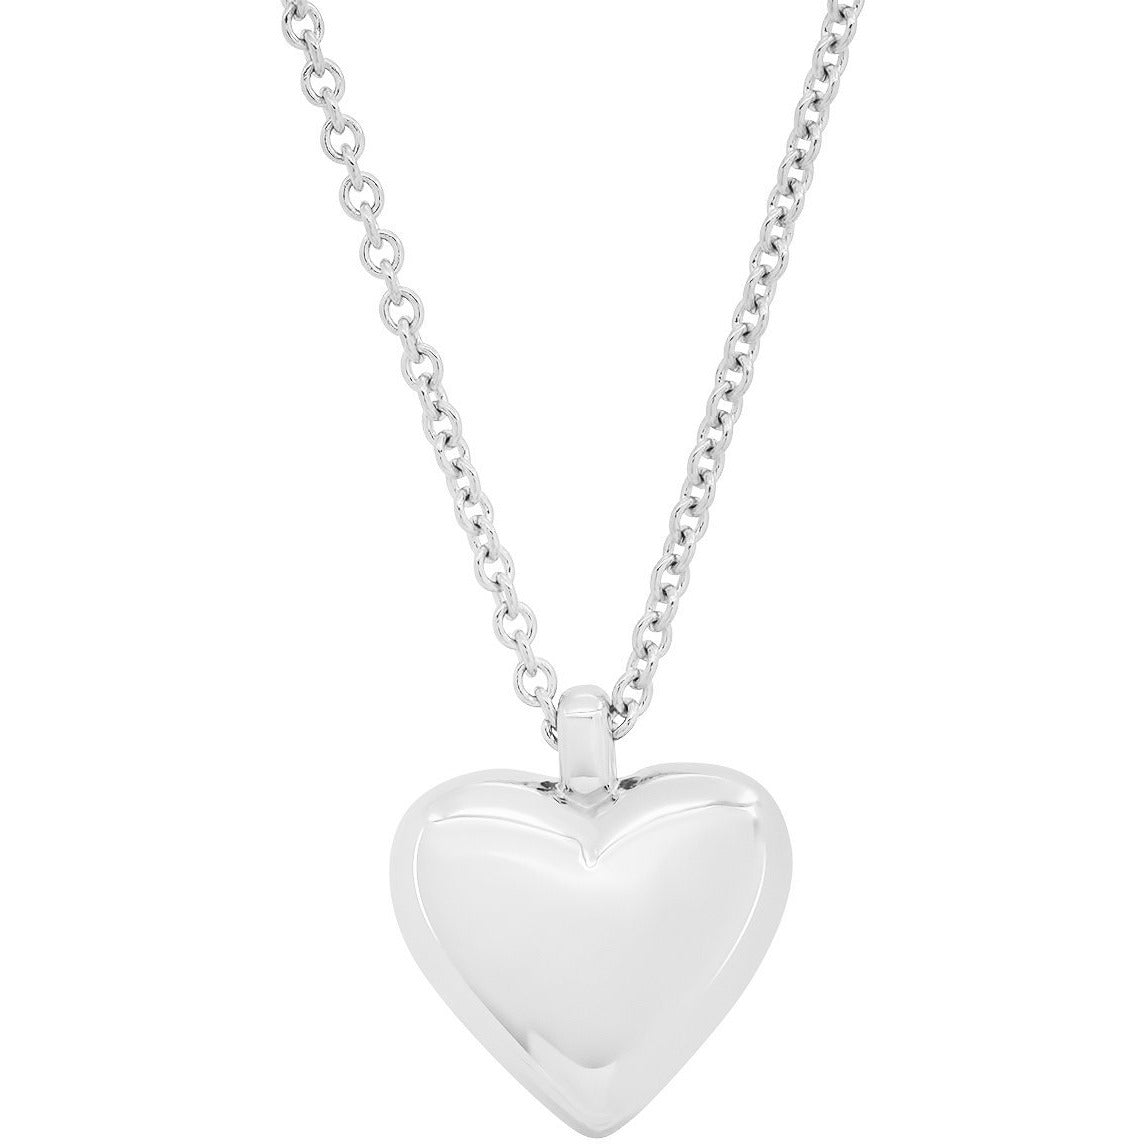 Small Reversible Diamond and Gold Puffy Heart Necklace